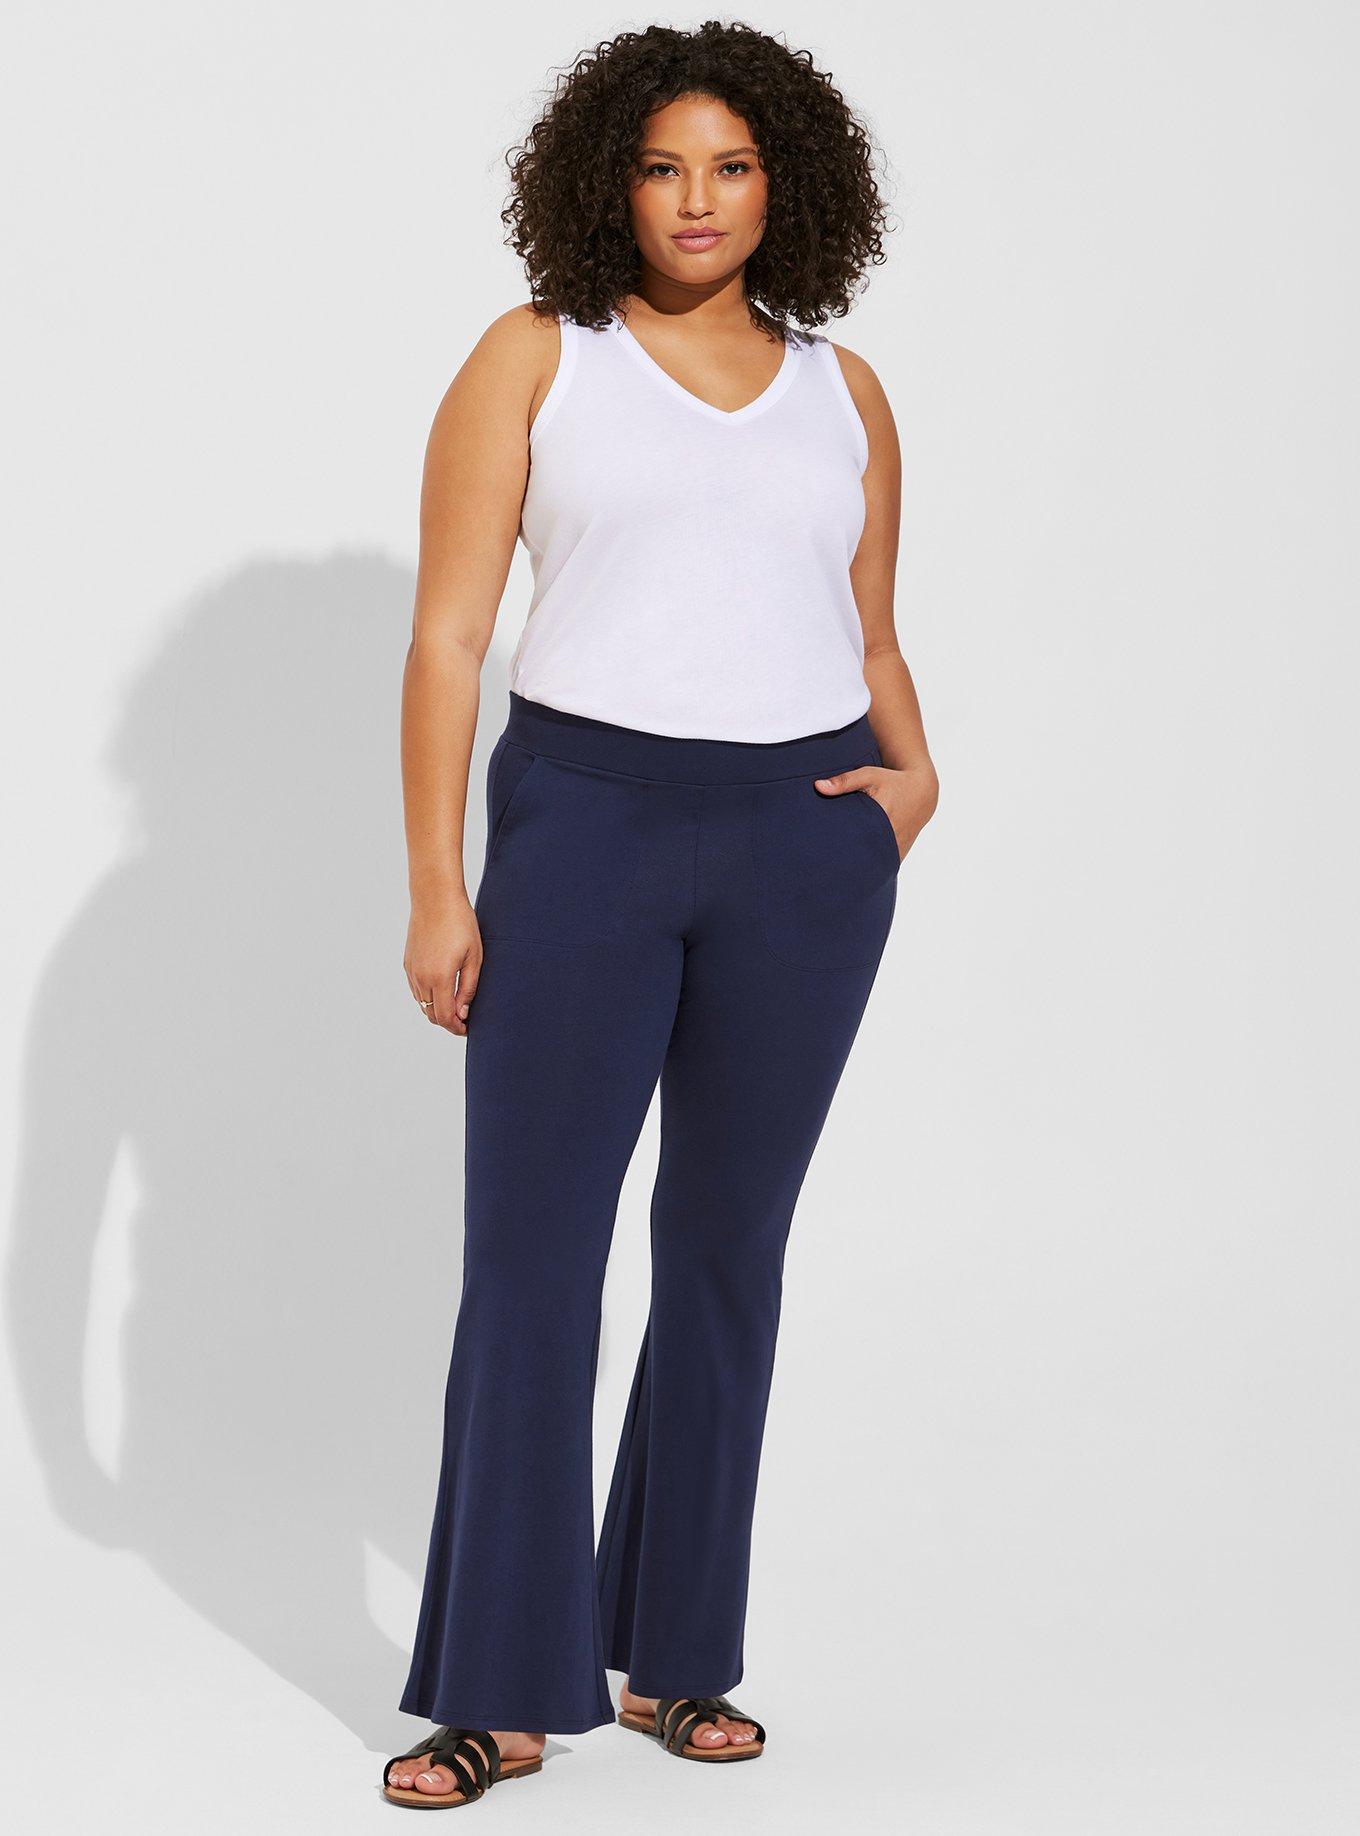 Solid color high rise flare leggings. Inseam approximately 31 in length. • High  rise style waist • Flare hem • Soft and stretchy fabric • Perfect for  styling with heels or booties •